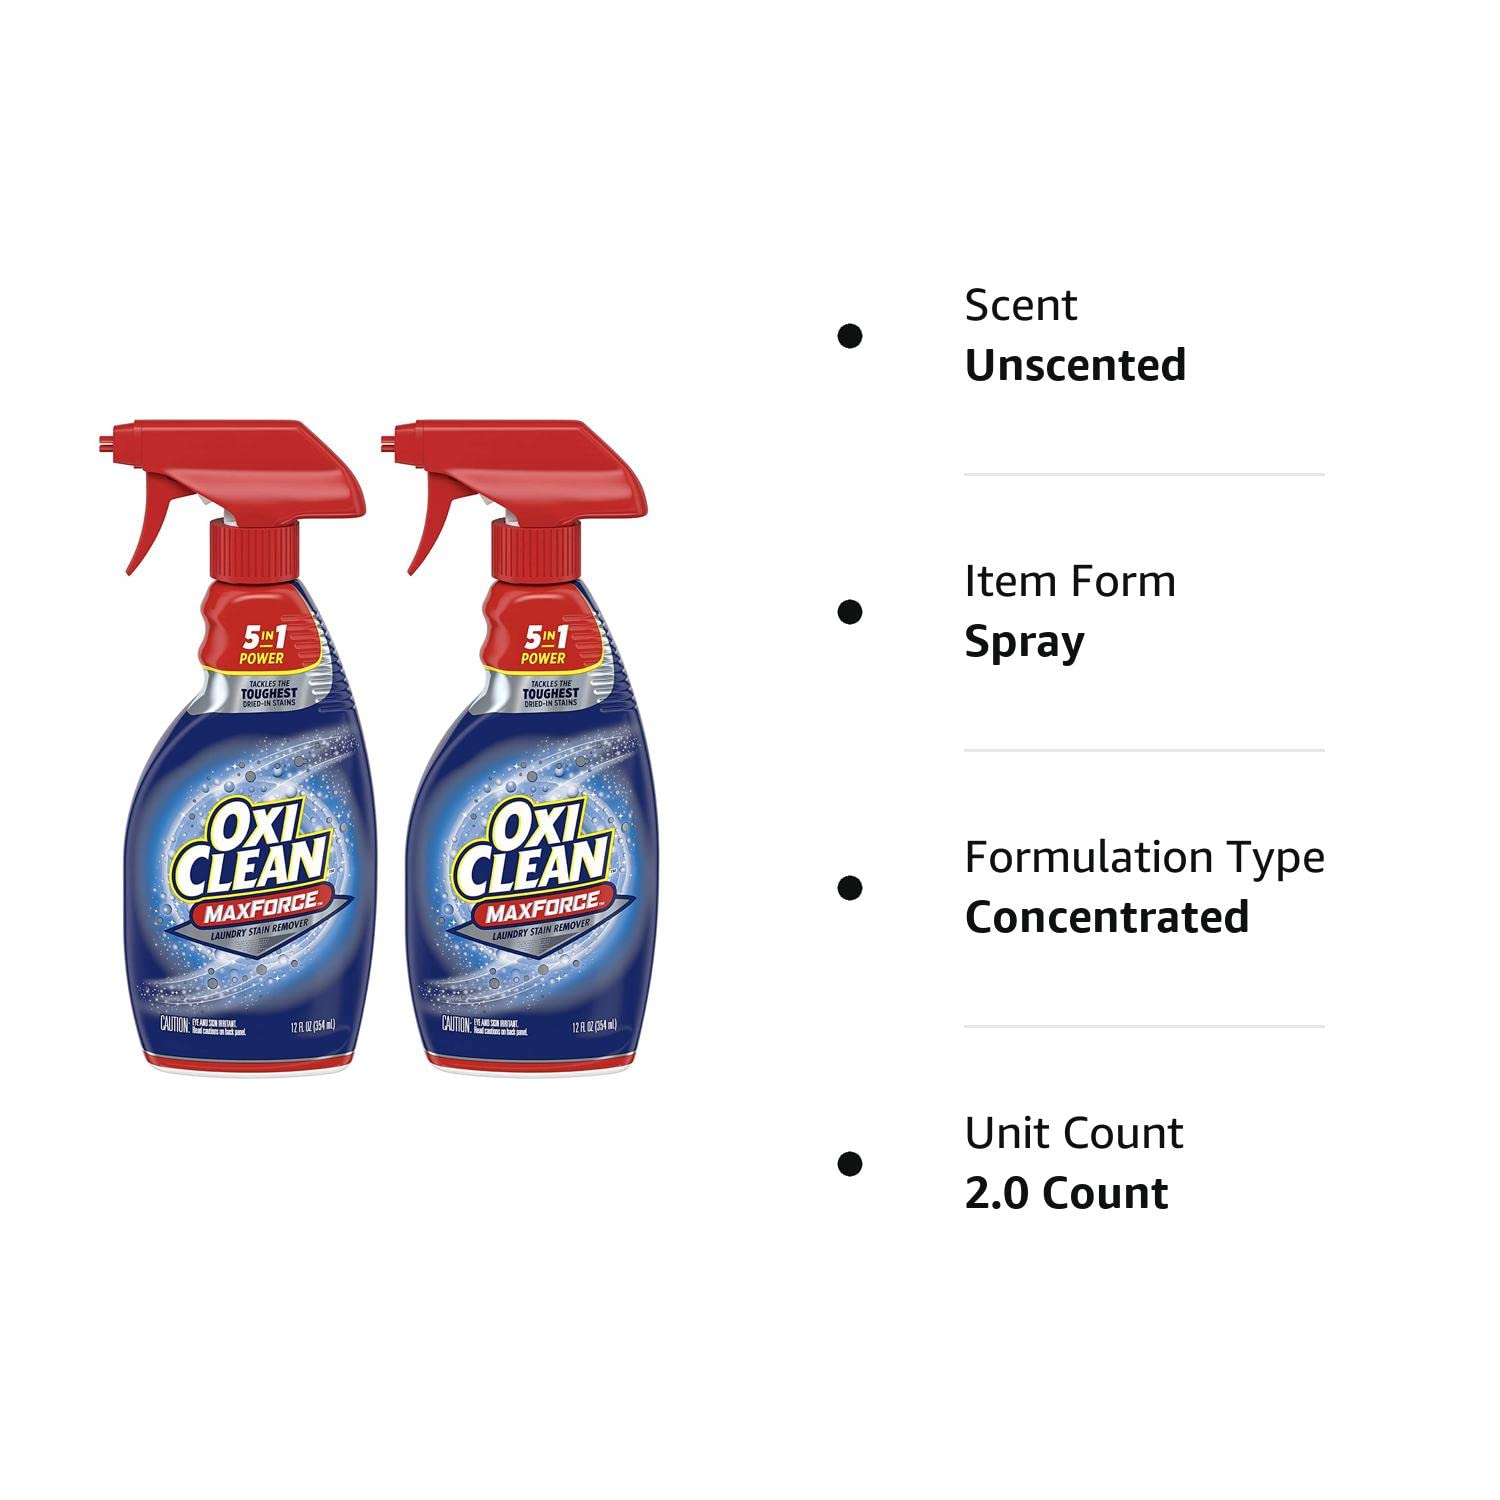 OxiClean Max Force 5 in 1 Power Laundry Stain Remover Spray, 12 oz - 2 PK : Health & Household